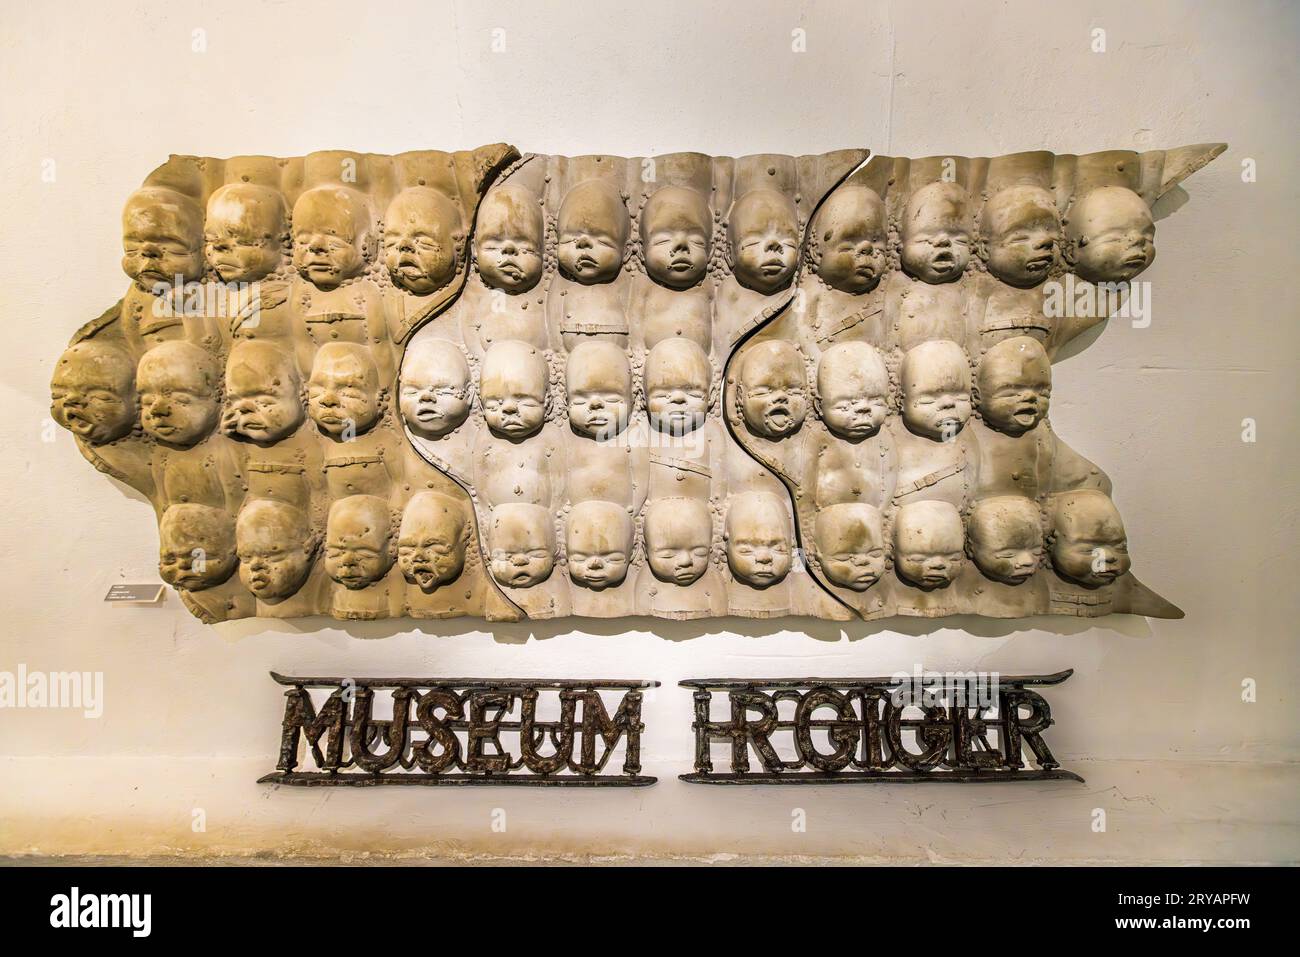 Entrance HR Giger Museum Gruyères, museum lettering and wall object made of infant masks. Hansrudi Giger received an Oscar in 1980 for his contribution to Alien. HR Giger Museum in Épagny Greyerz, Switzerland Stock Photo